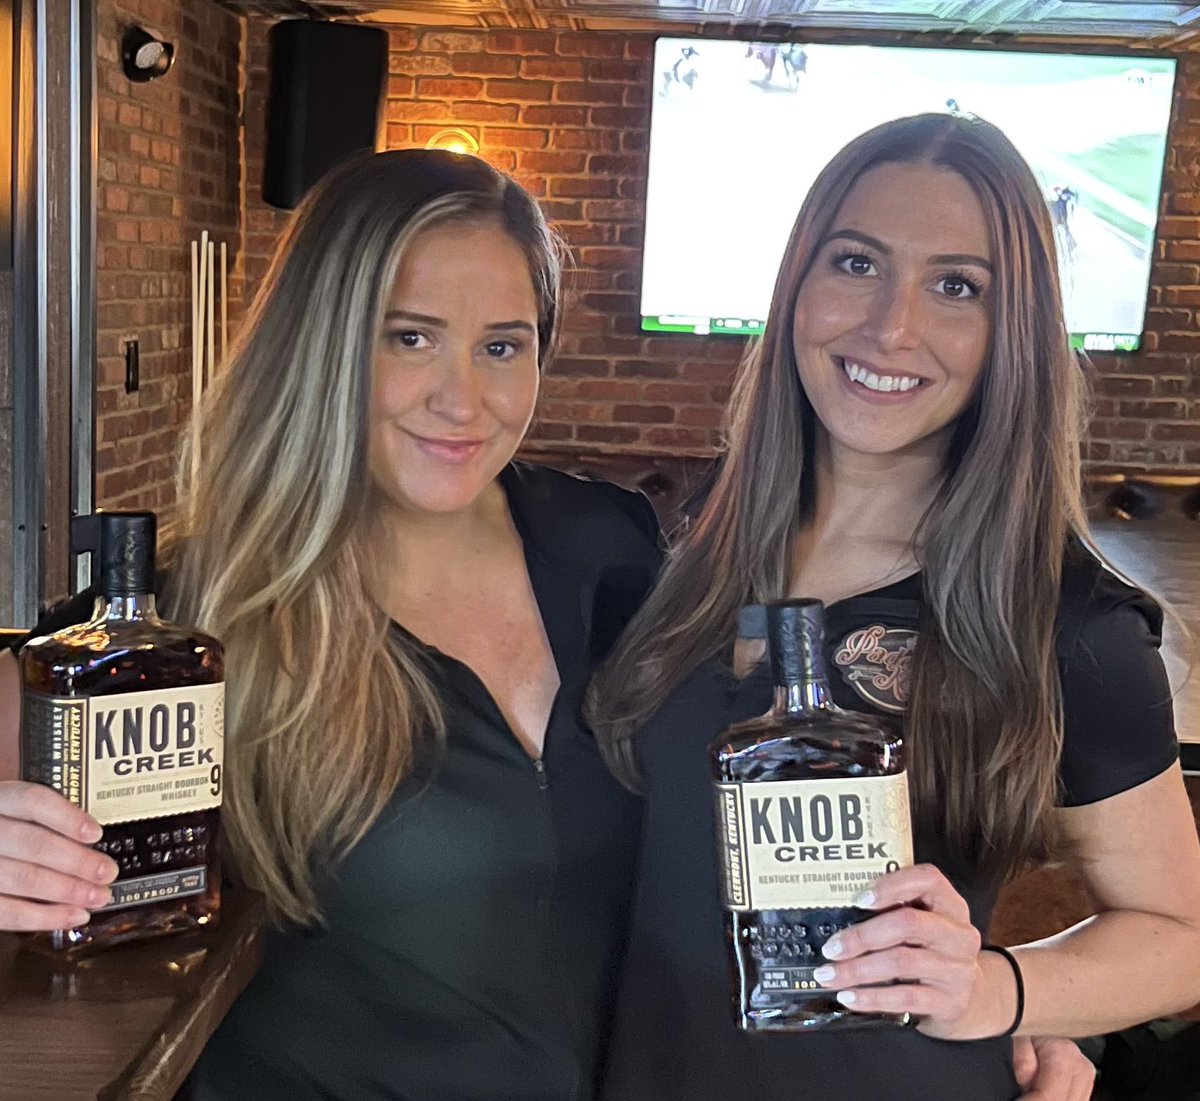 🥃 Knob Creek Promo Team will be here tonight 9:30-11:30! ✨ Join us for some Free tastings, drinks & giveaways! 🥅 Stanley Cup tonight @8! #knobcreek #stanleycup #bostondrinks